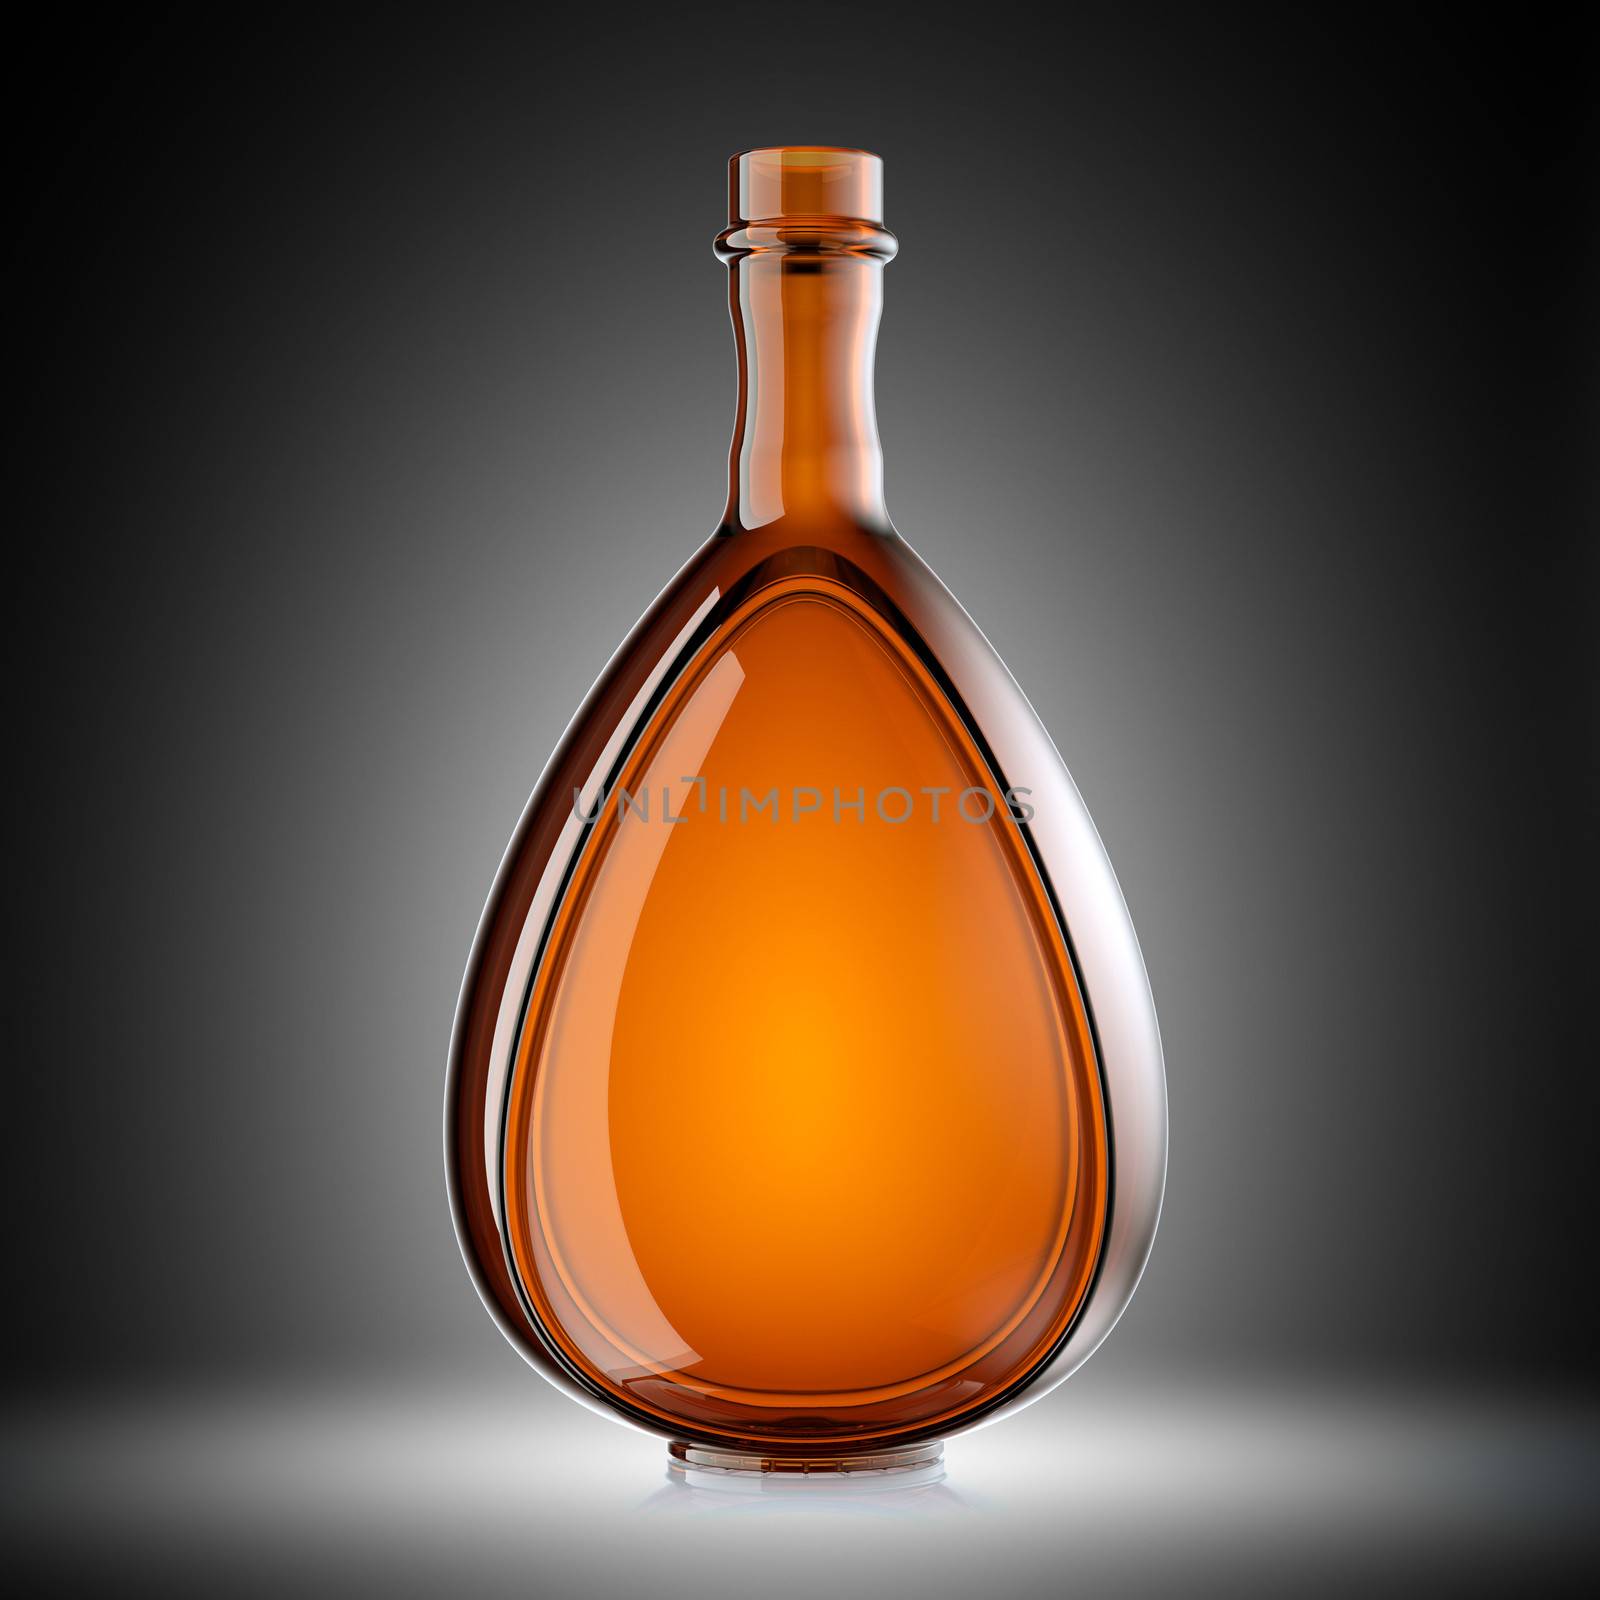 Red glass bottle for wine or brandy by Arsgera